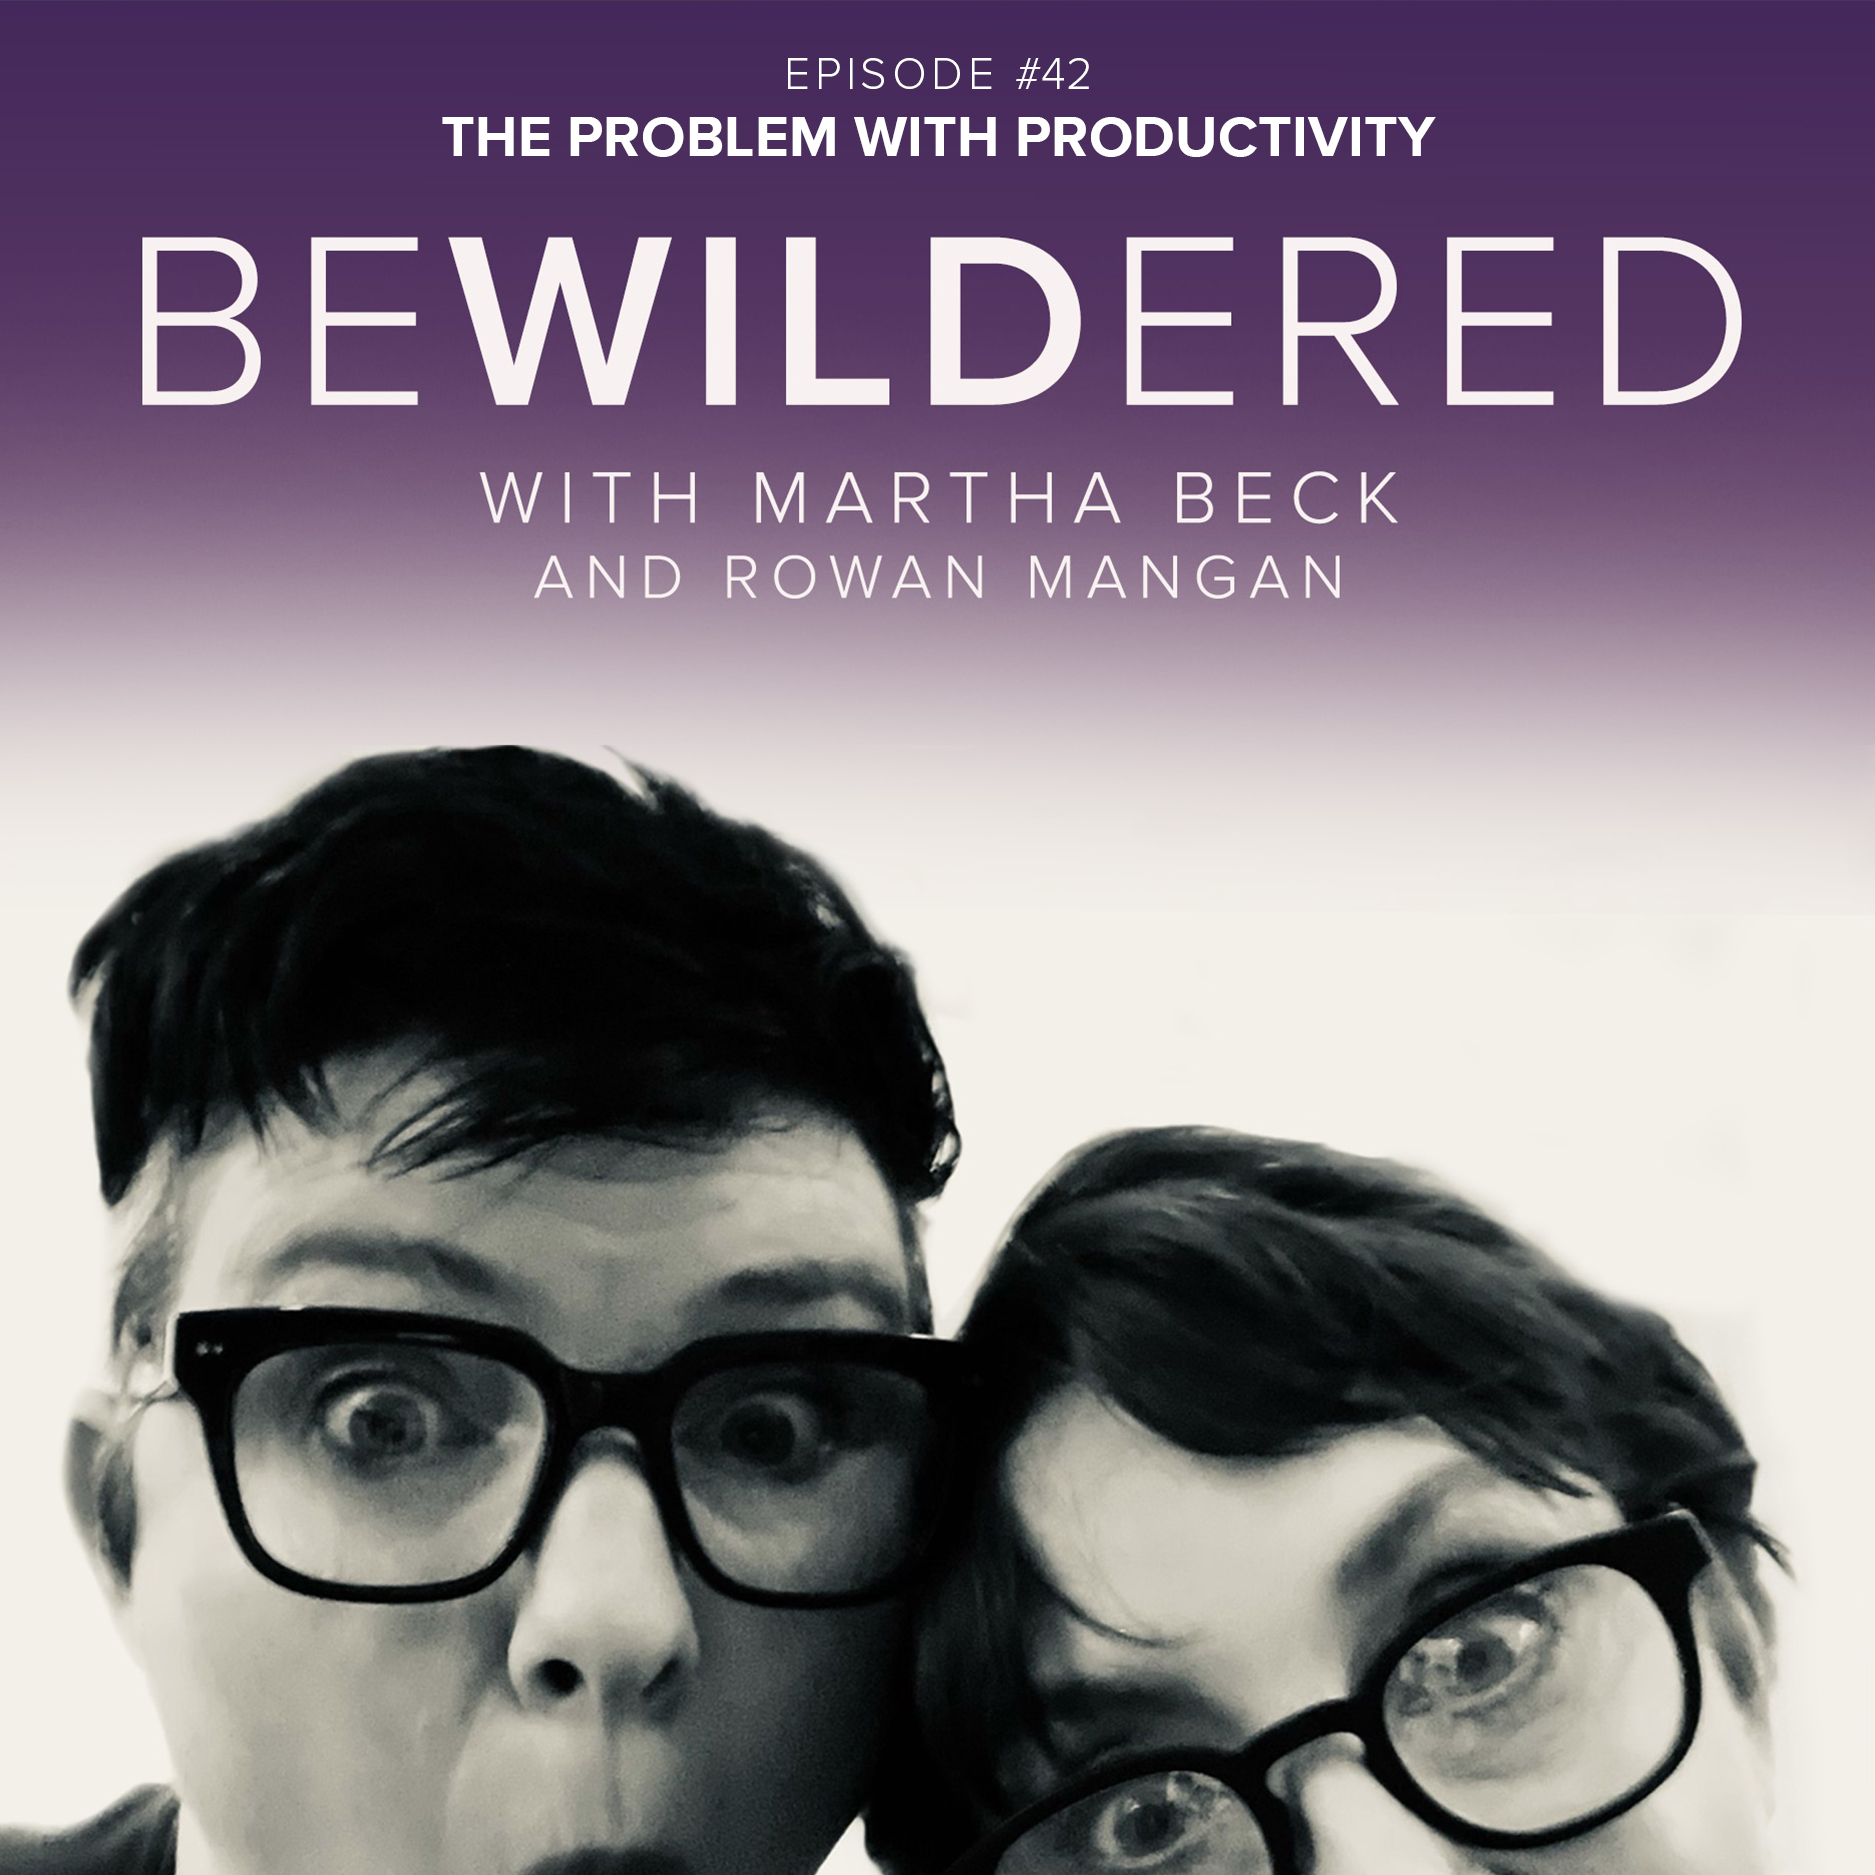 Image for Episode #42 The Problem with Productivity for the Bewildered Podcast with Martha Beck and Rowan Mangan